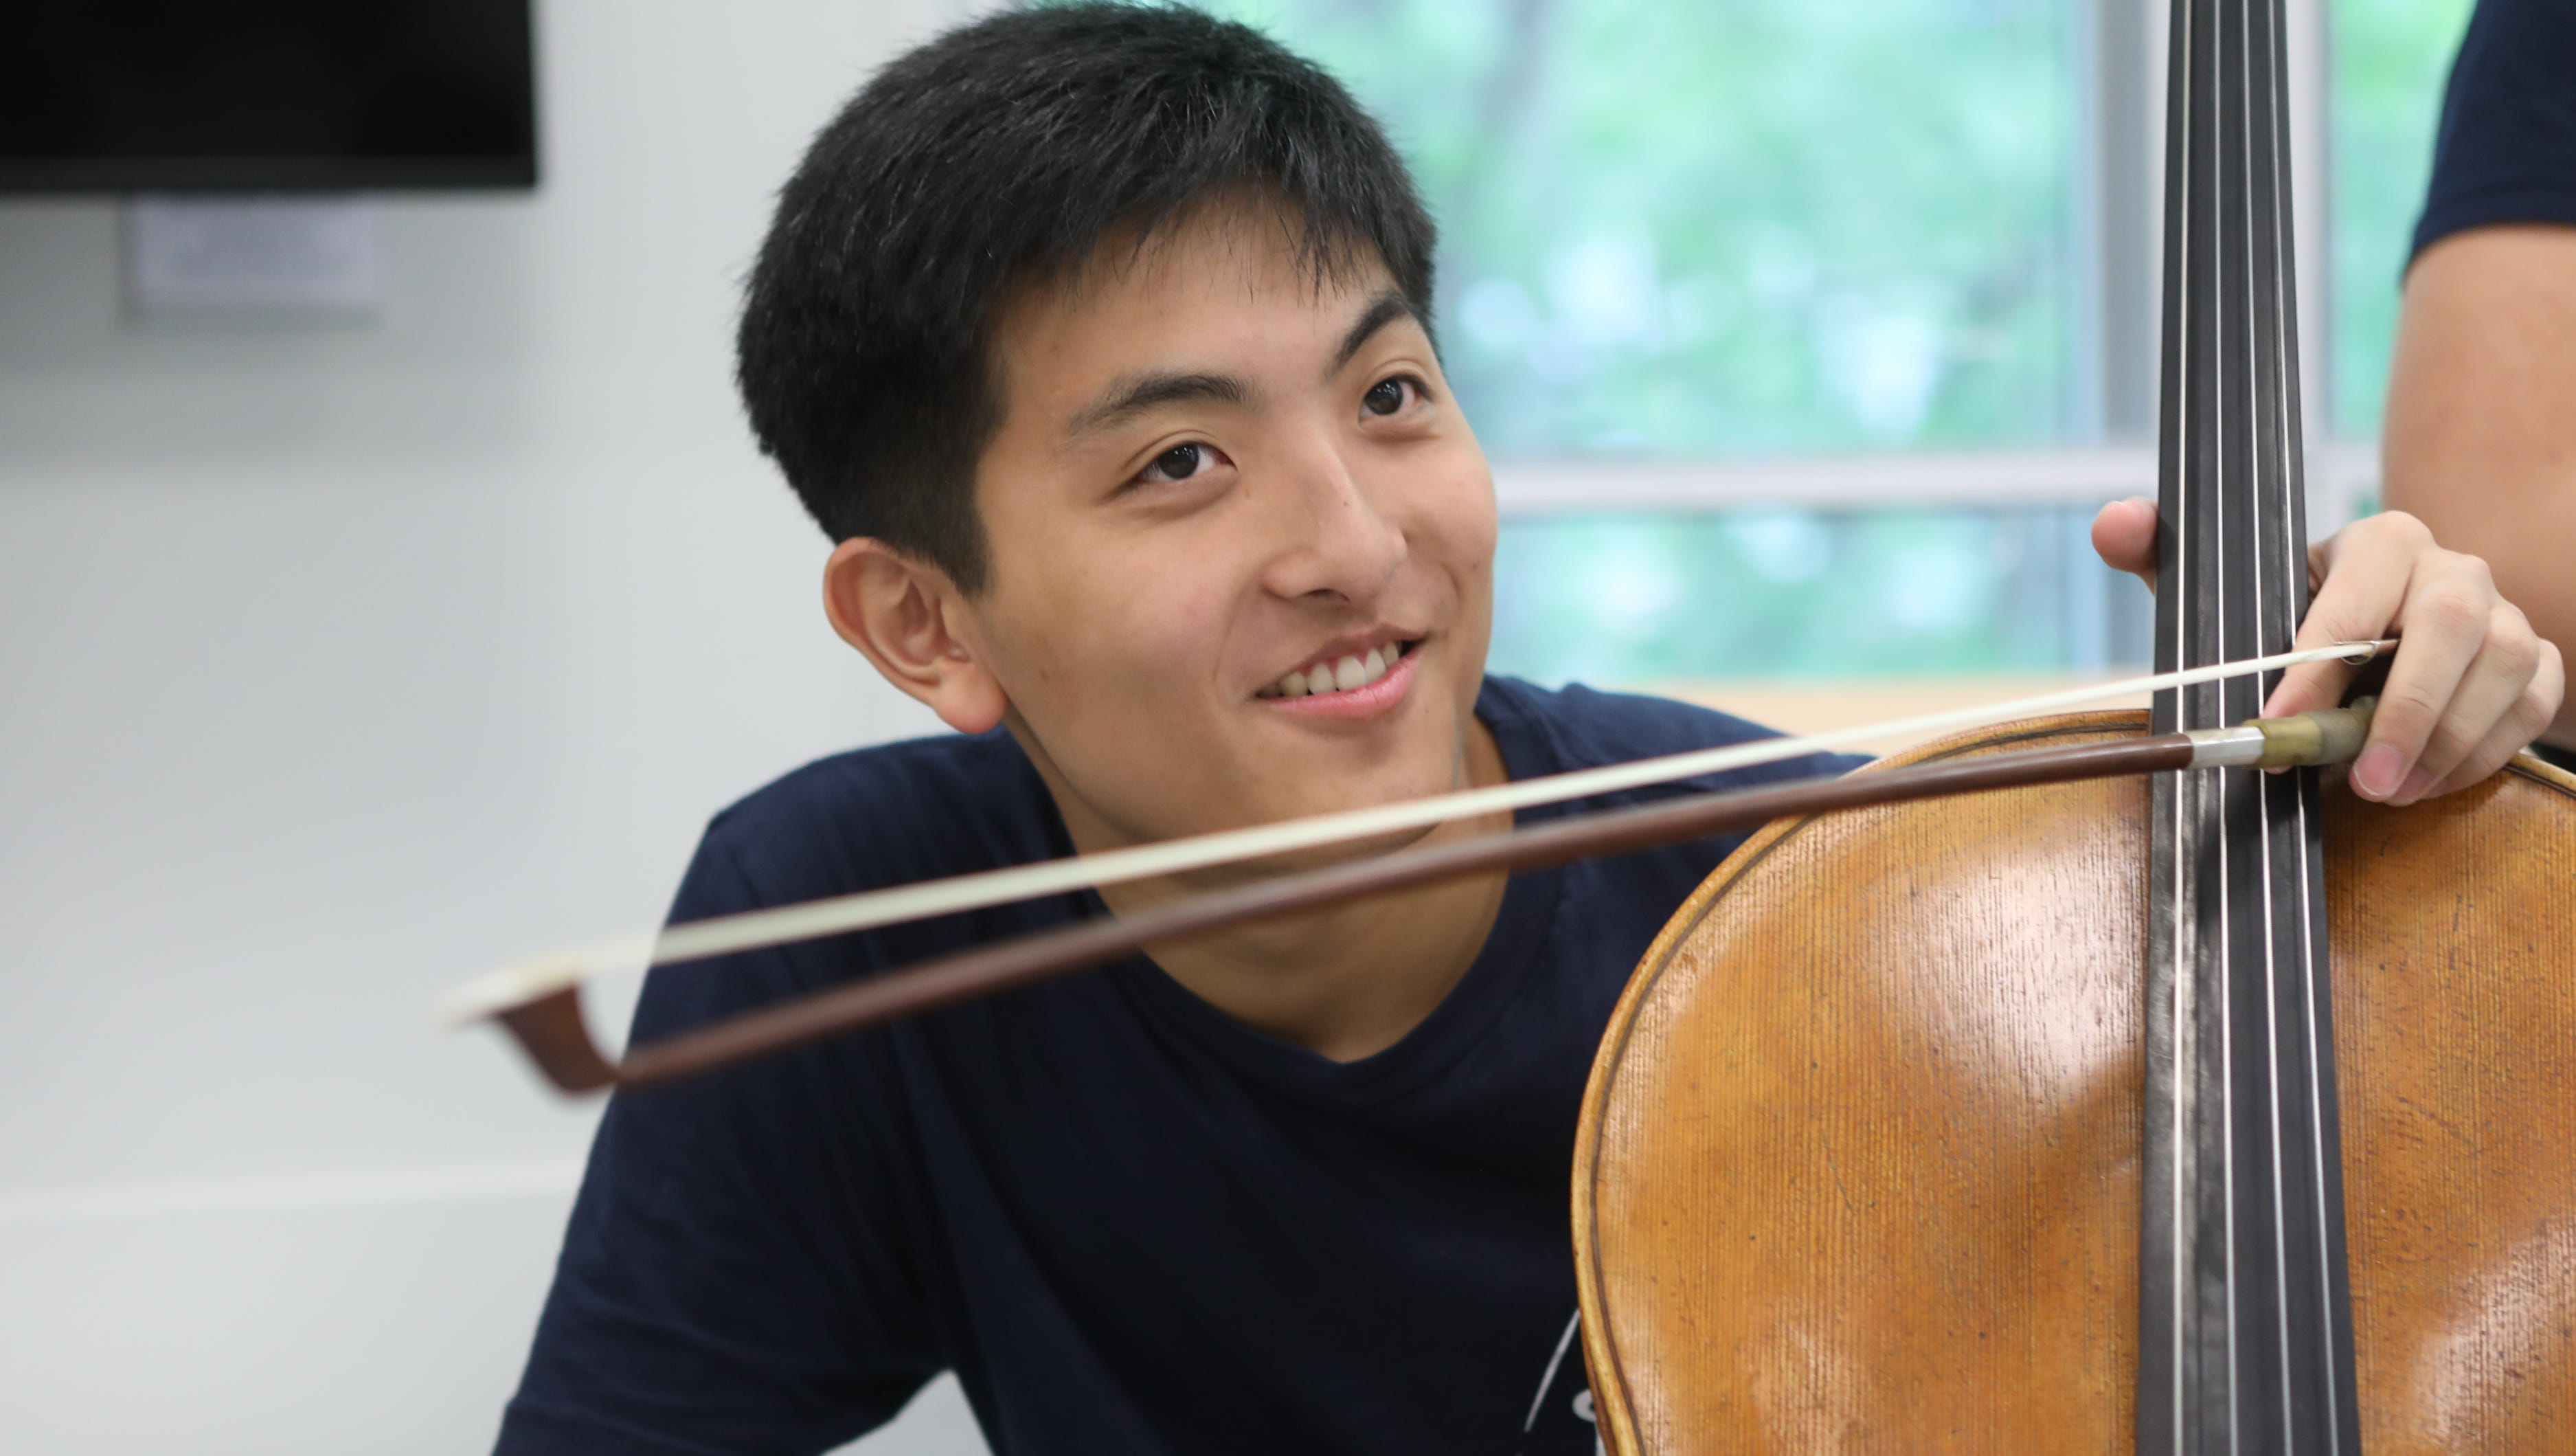 Teenage cello prodigy brings virtuosity, passion to the classroom